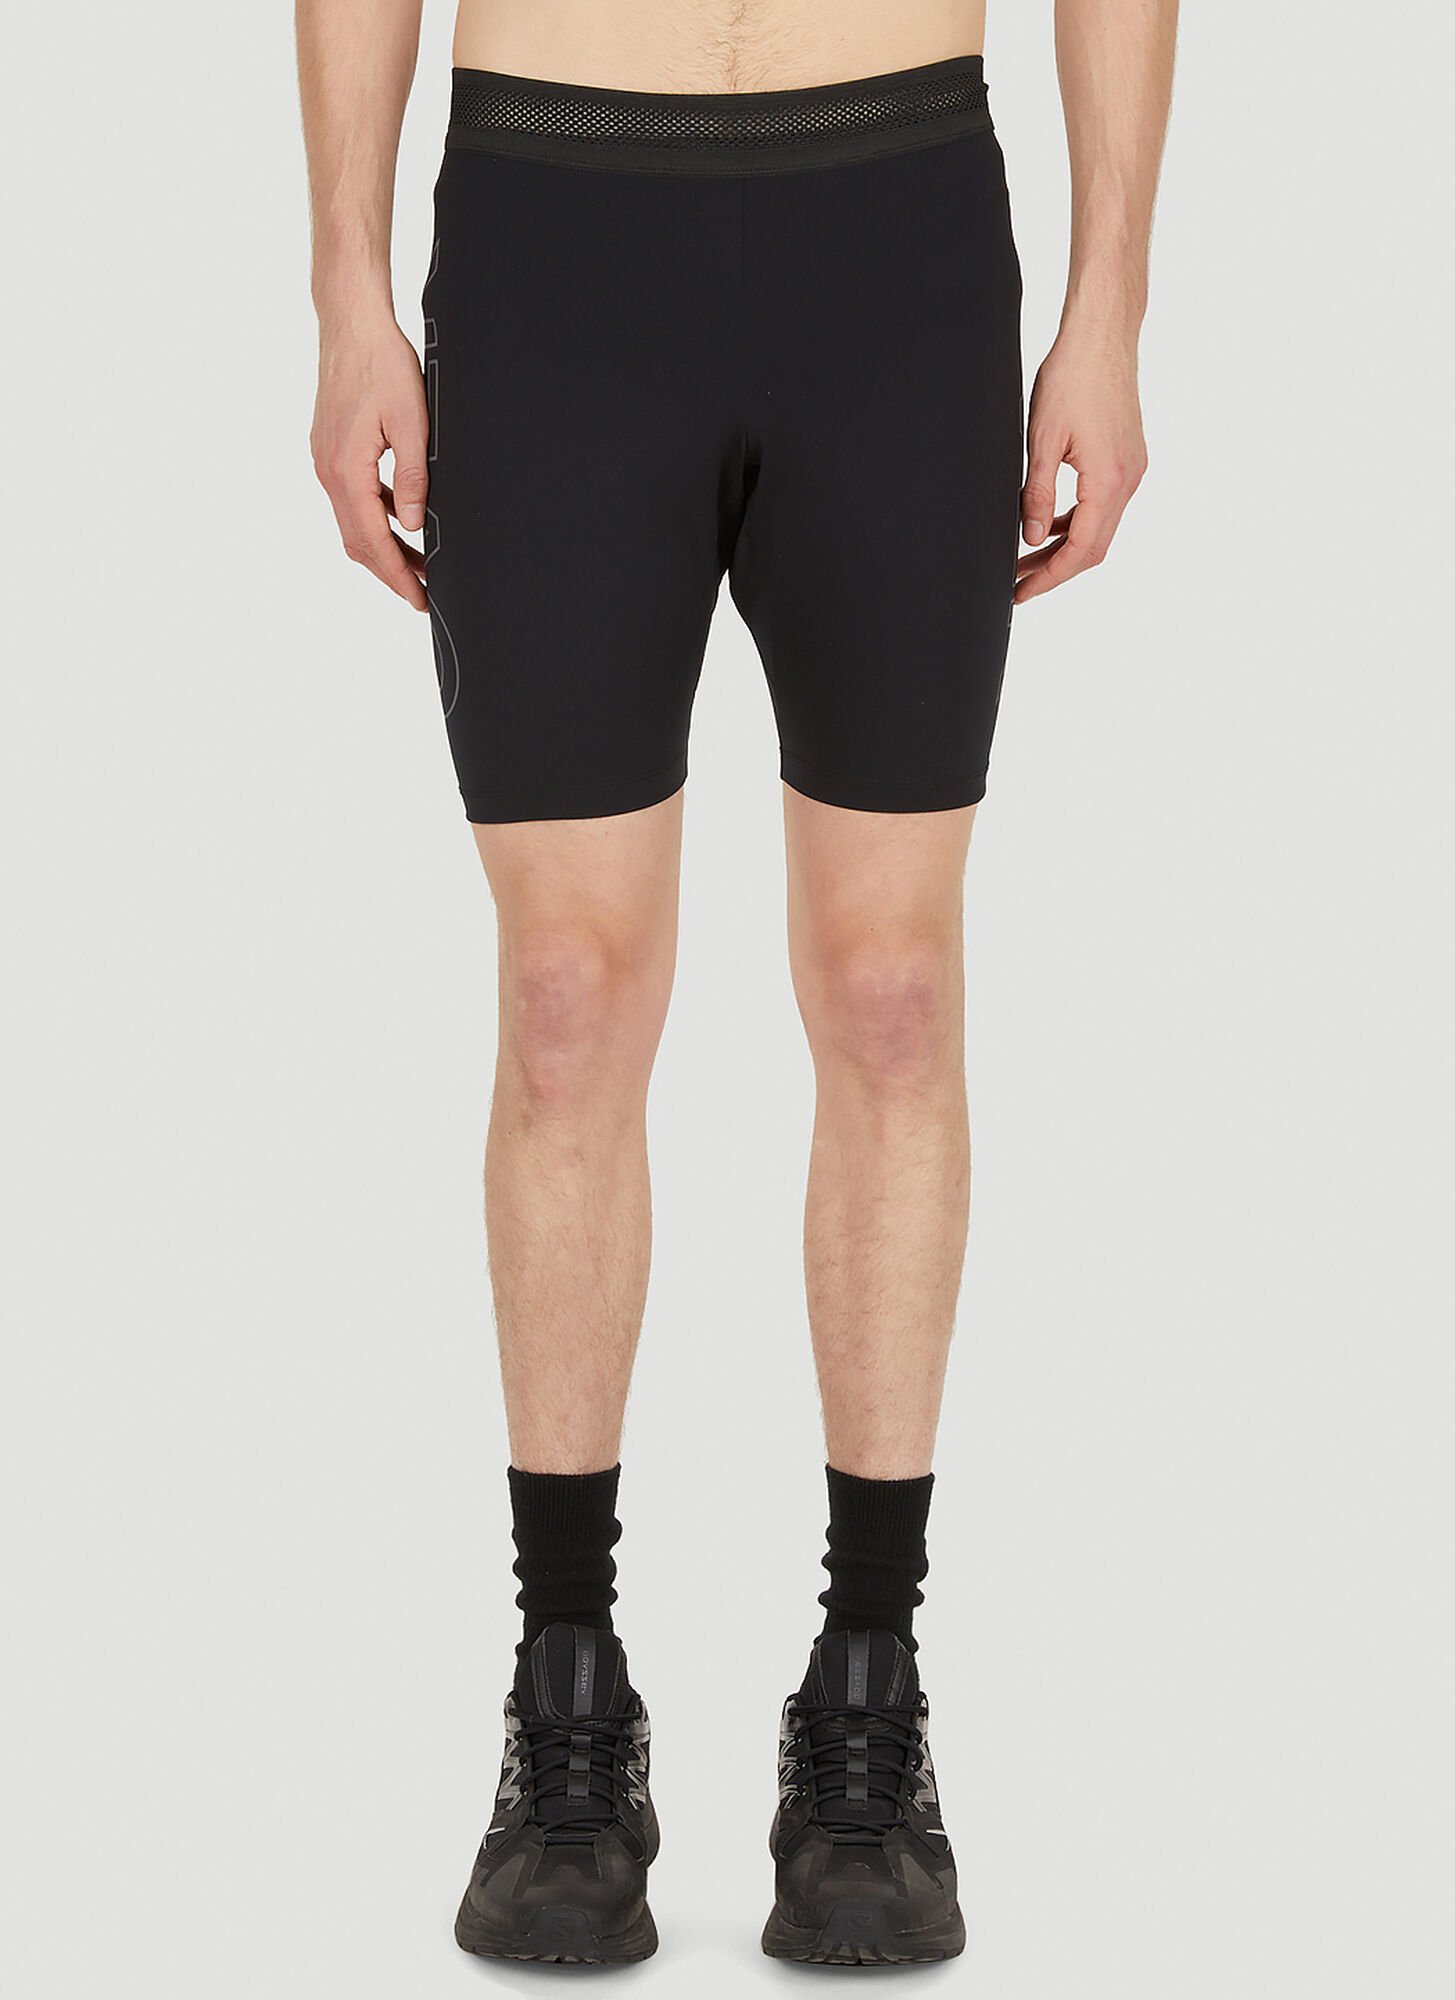 Over Over Cycling Shorts Male Black